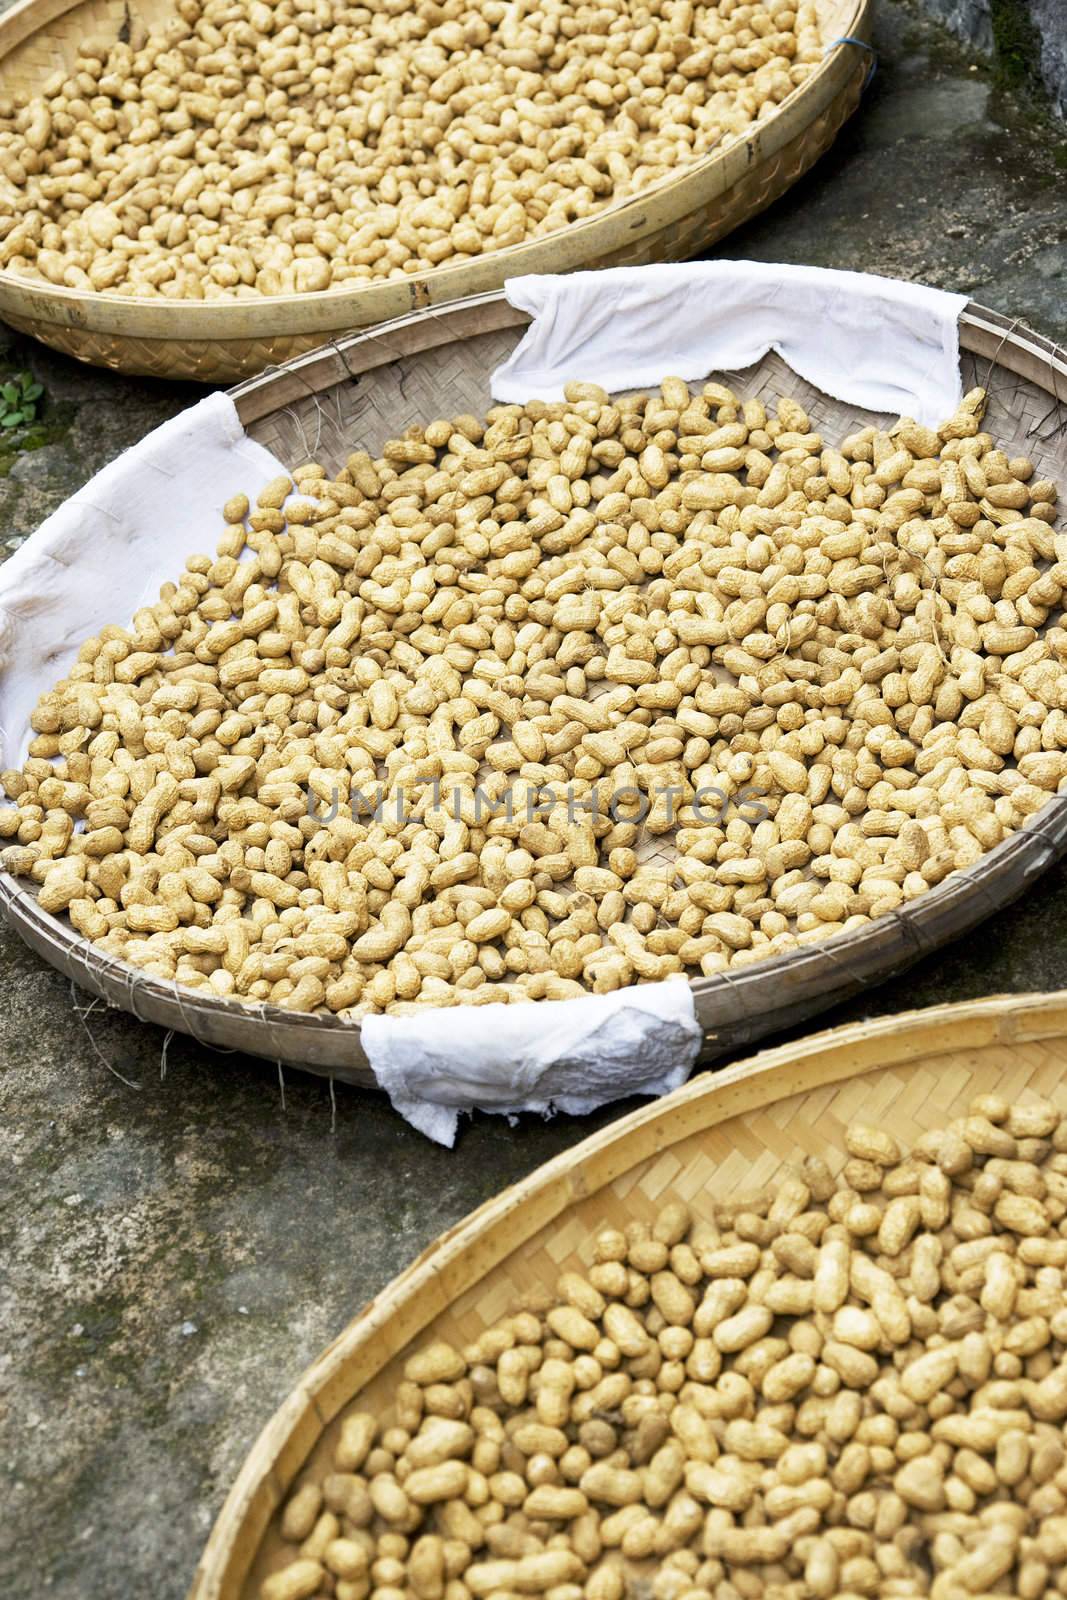 Groundnuts Being Dried by shariffc